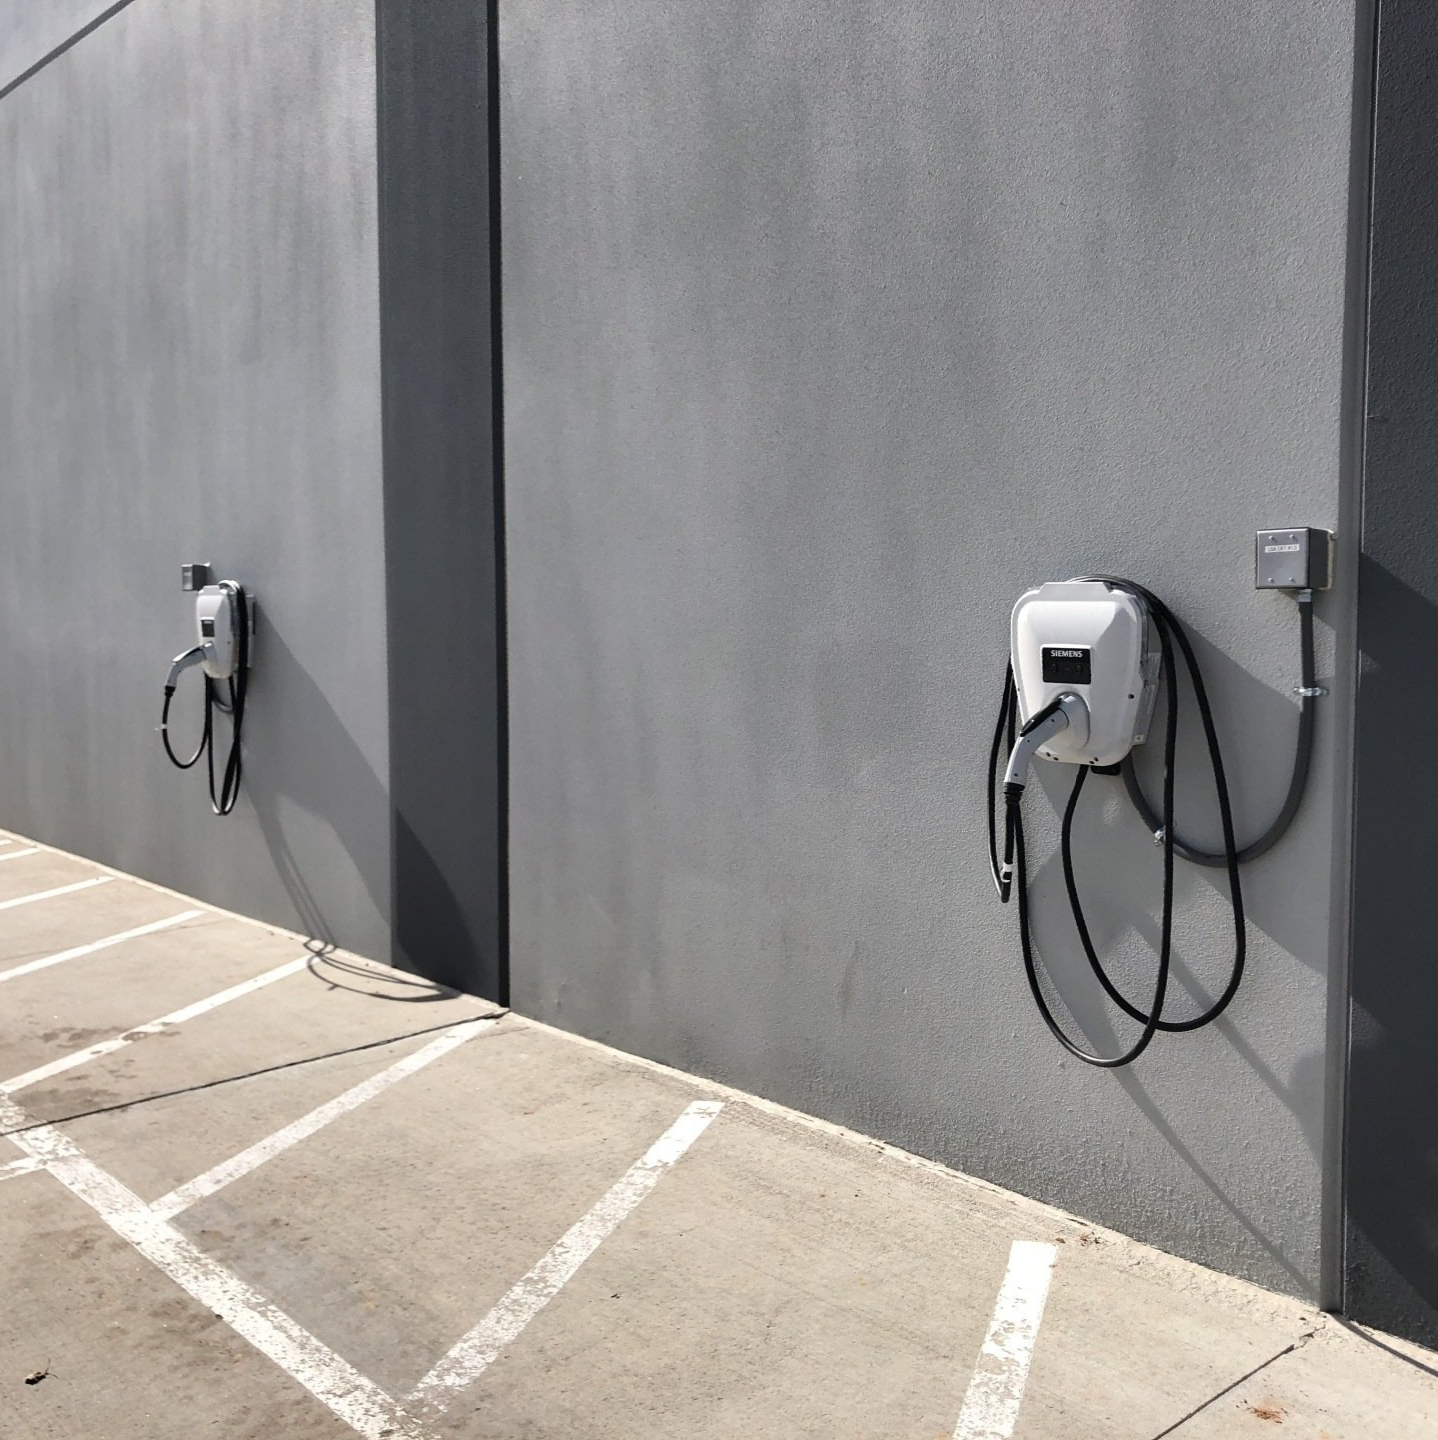 two electric vehicle charging stations on the side of a building